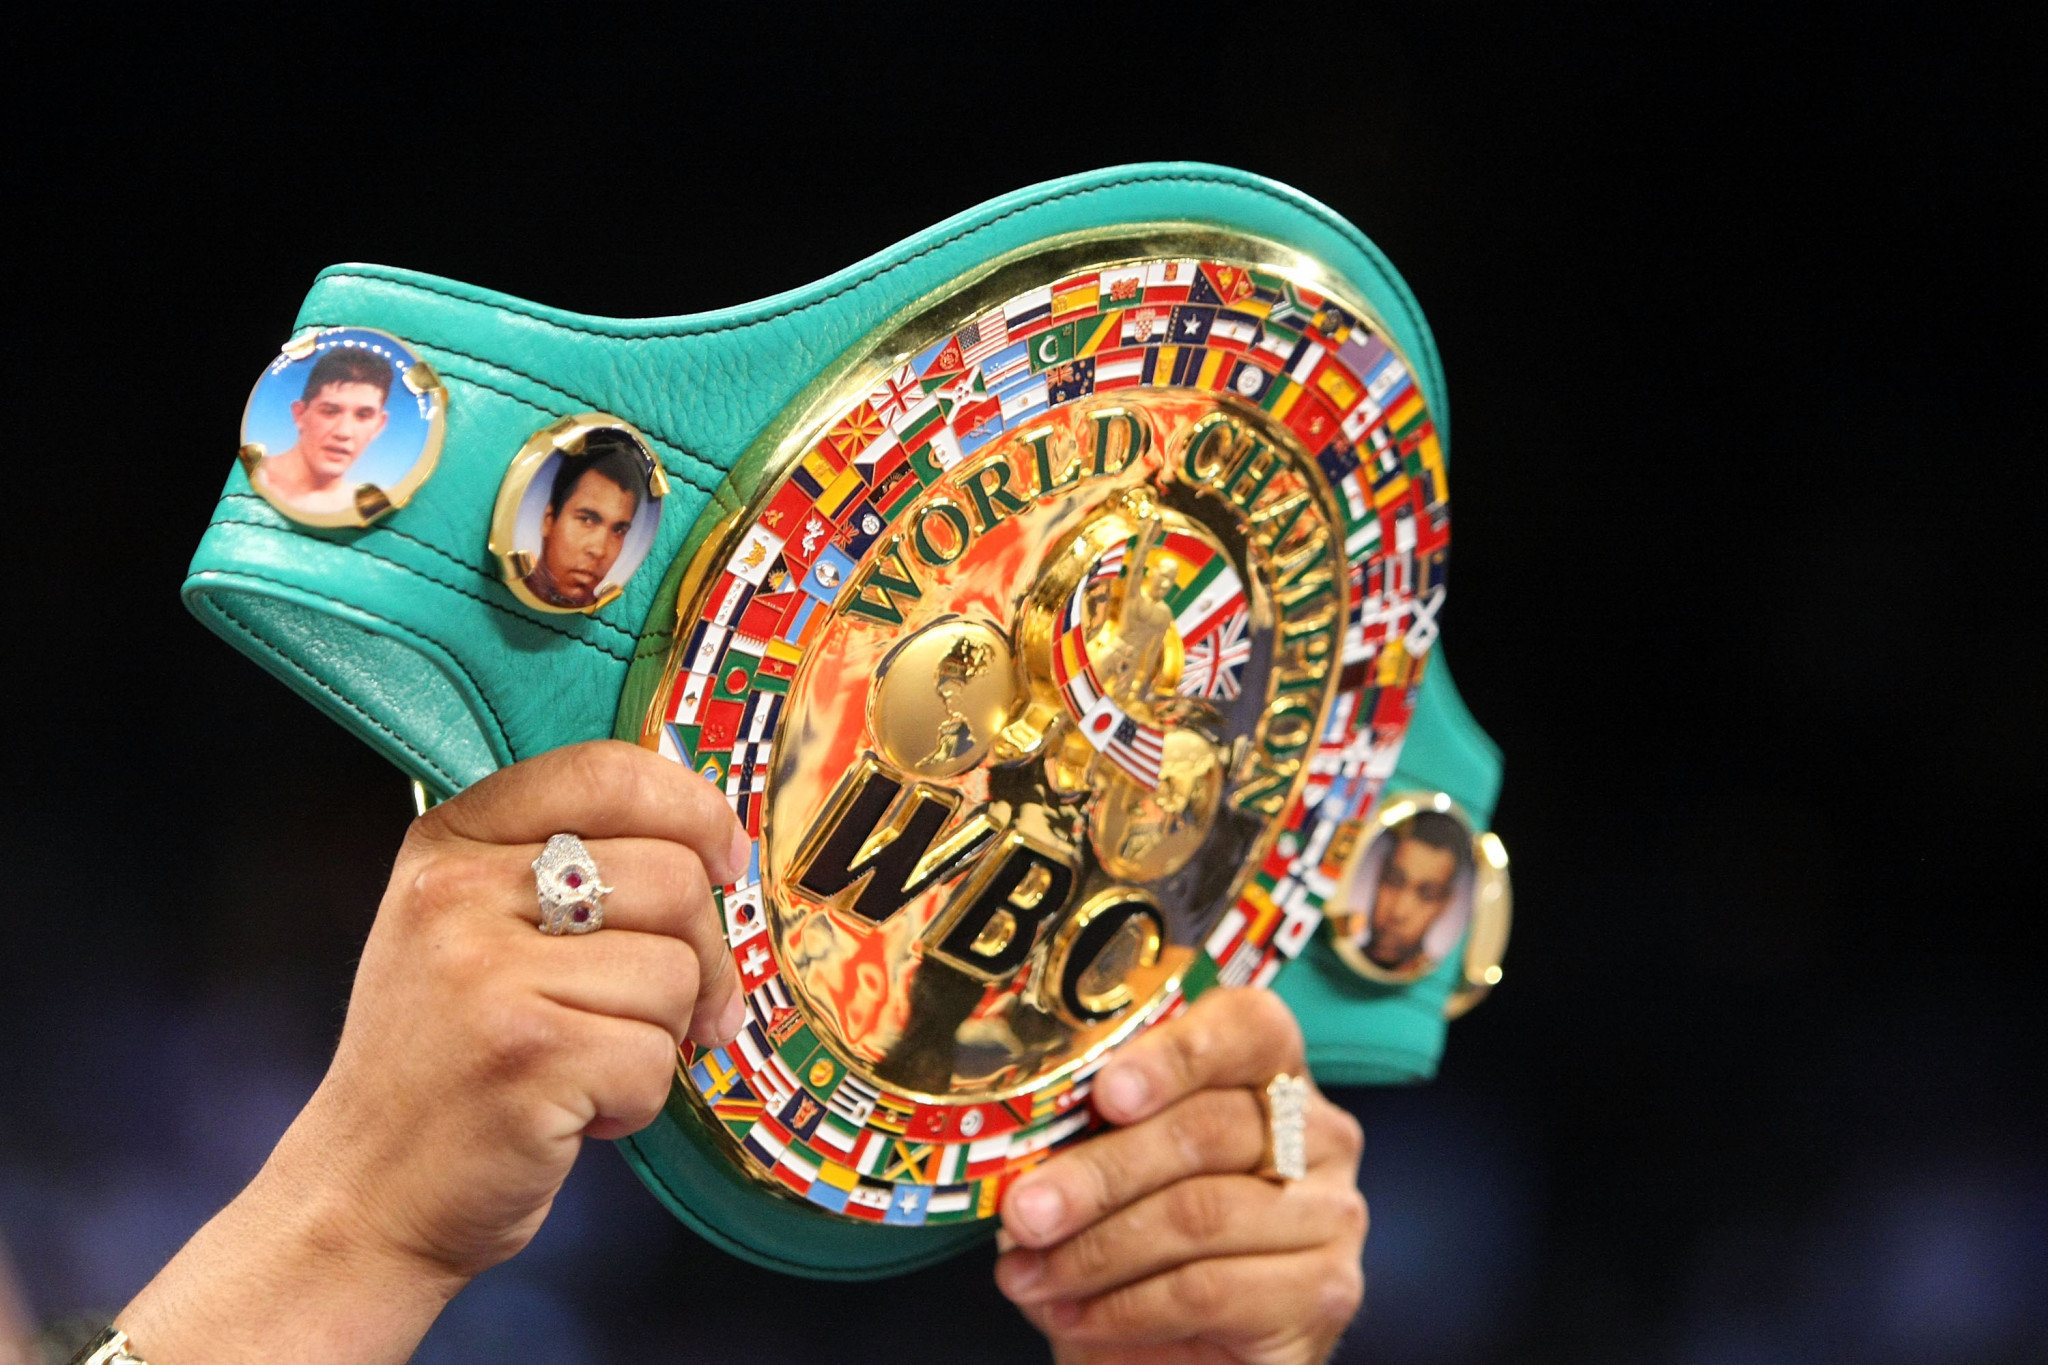 The IBA has rejected the WBC's claims, saying that the belt 